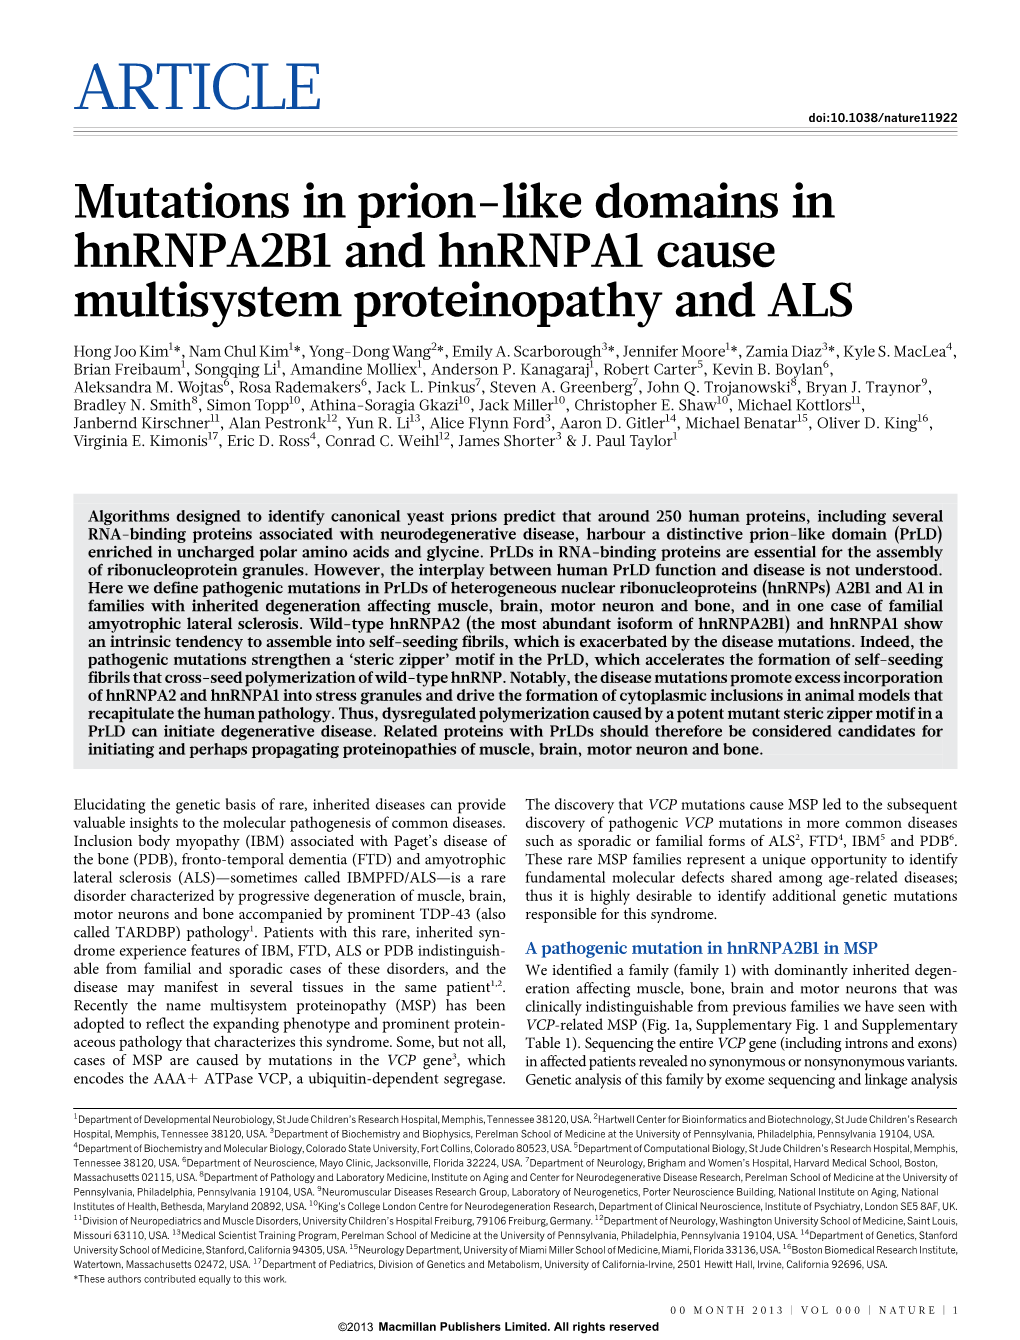 Mutations in Prion-Like Domains in Hnrnpa2b1 and Hnrnpa1 Cause Multisystem Proteinopathy and ALS